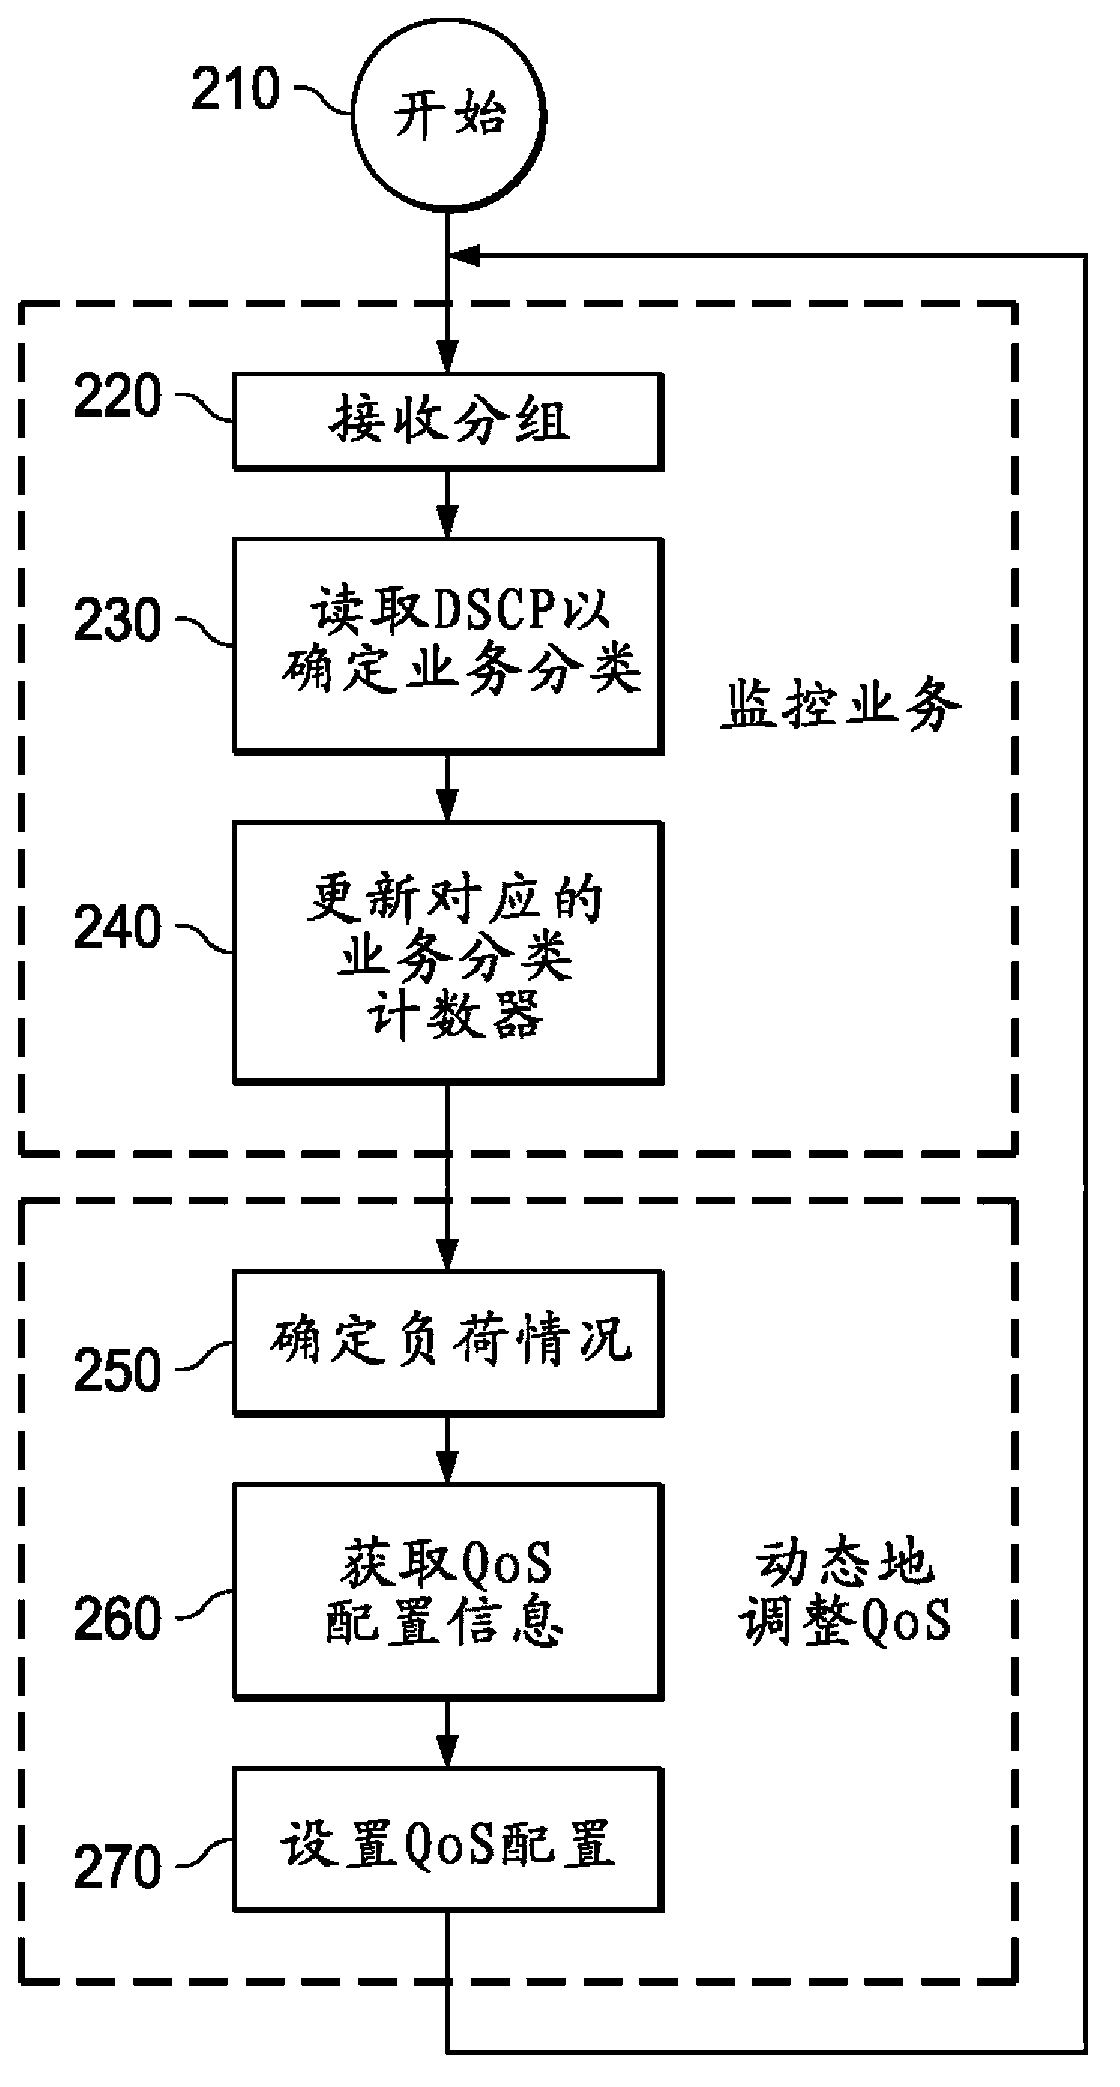 System and method for dynamically adjusting quality of service configuration based on real-time traffic